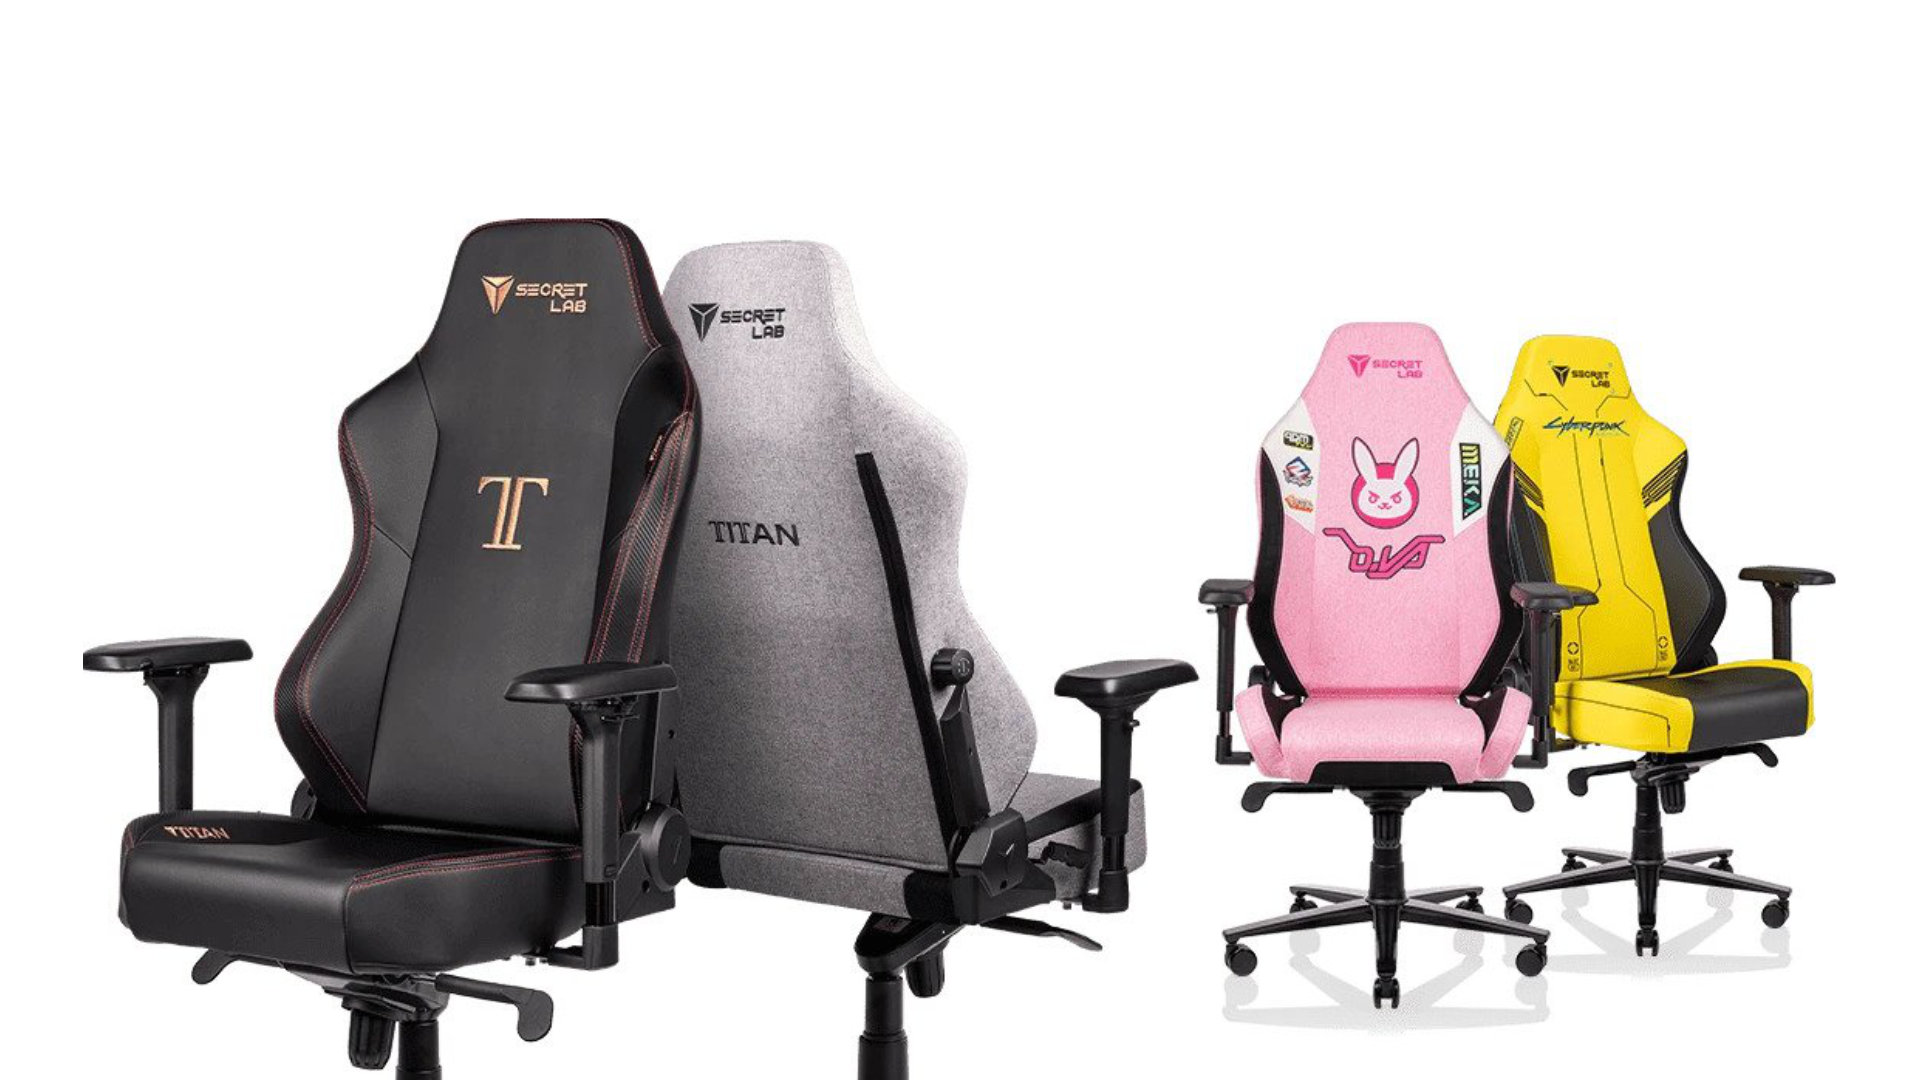 Save Up To 100 On These Secretlab Gaming Chairs Pcgamesn